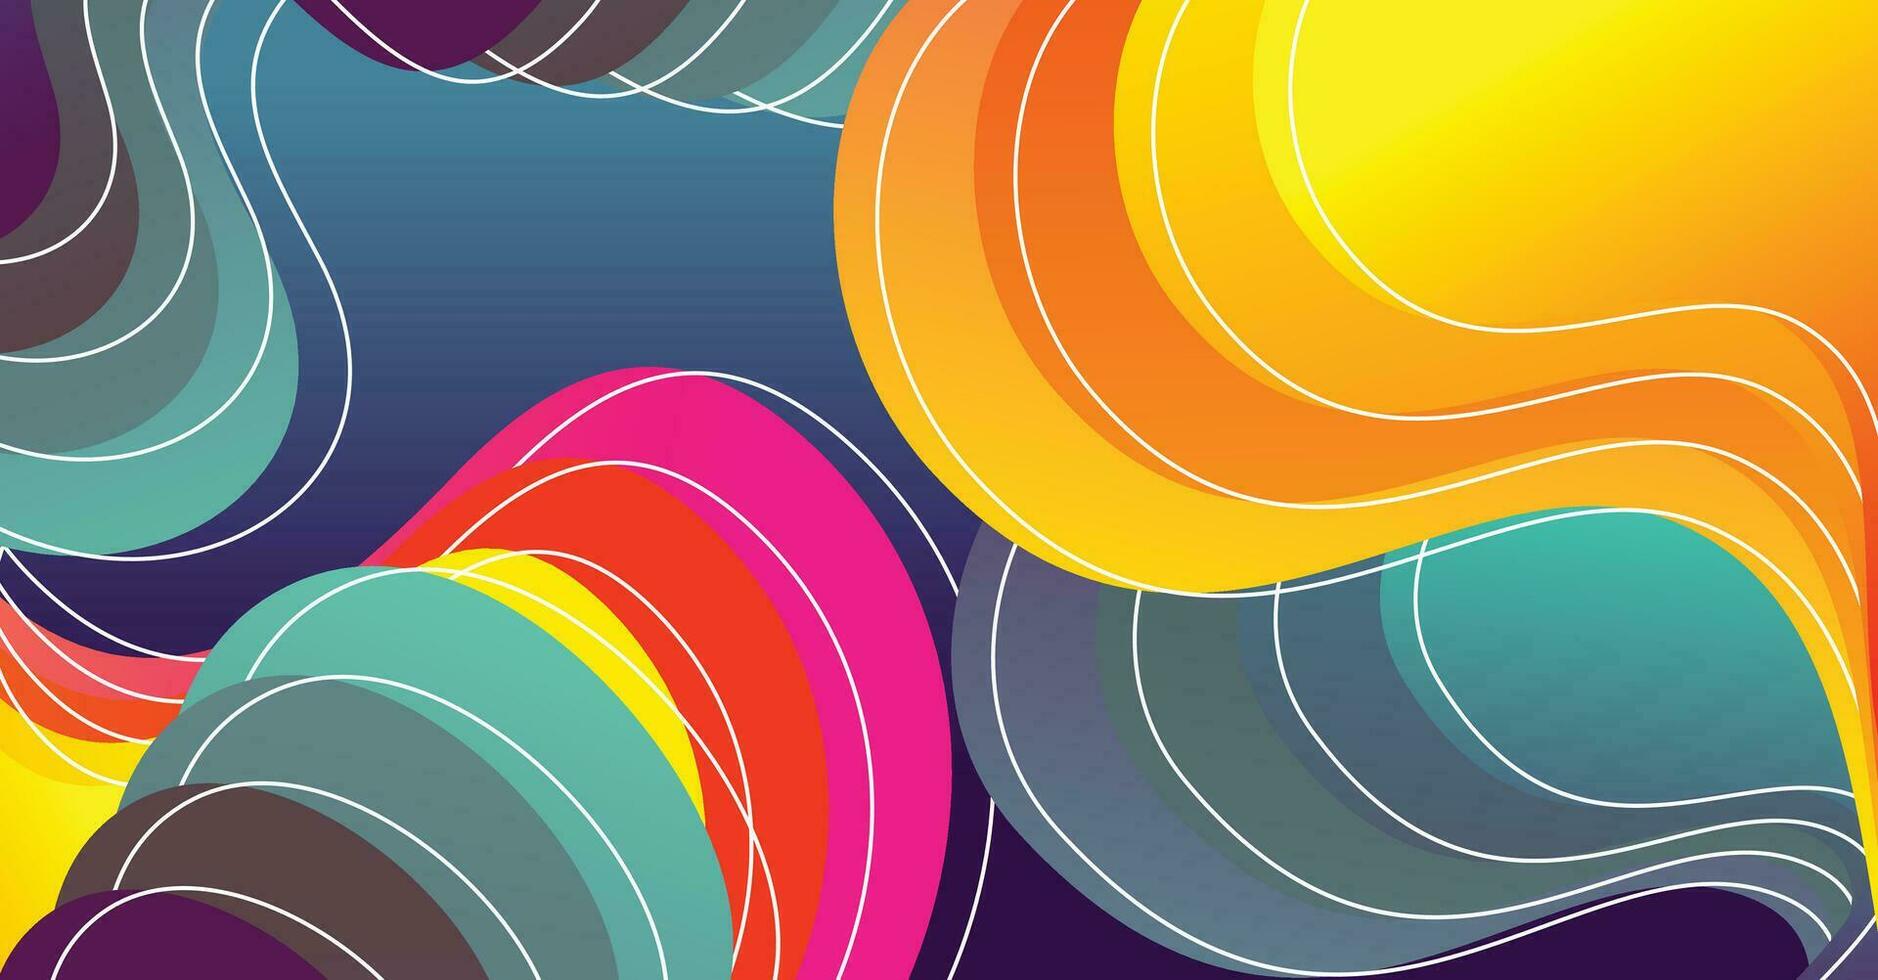 Abstract liquid wave background with colorful background vector